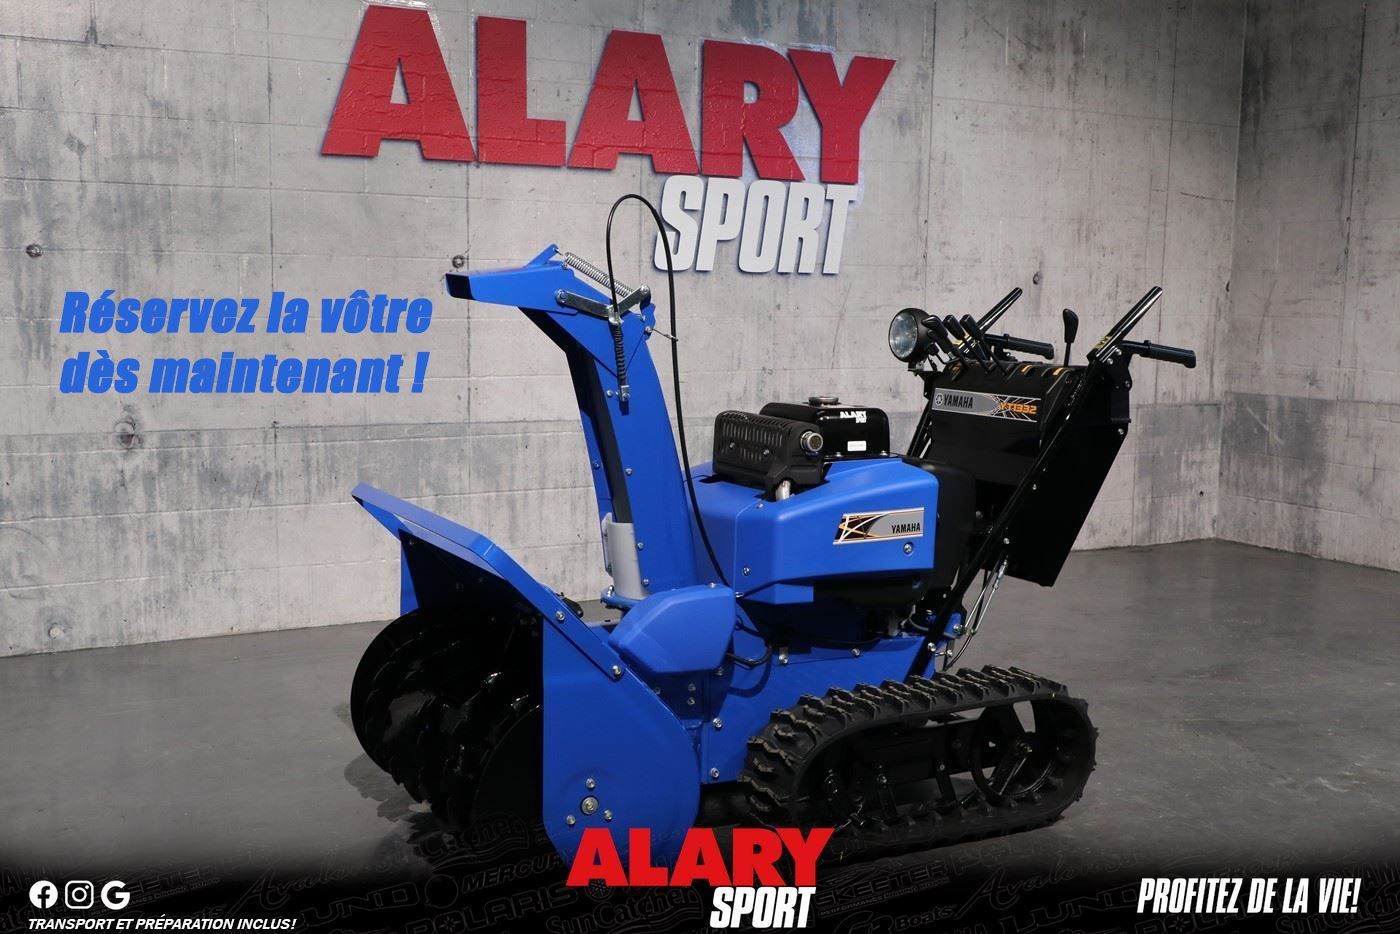 Alary Sport | Motorized-equipment Yamaha in our Complete inventory